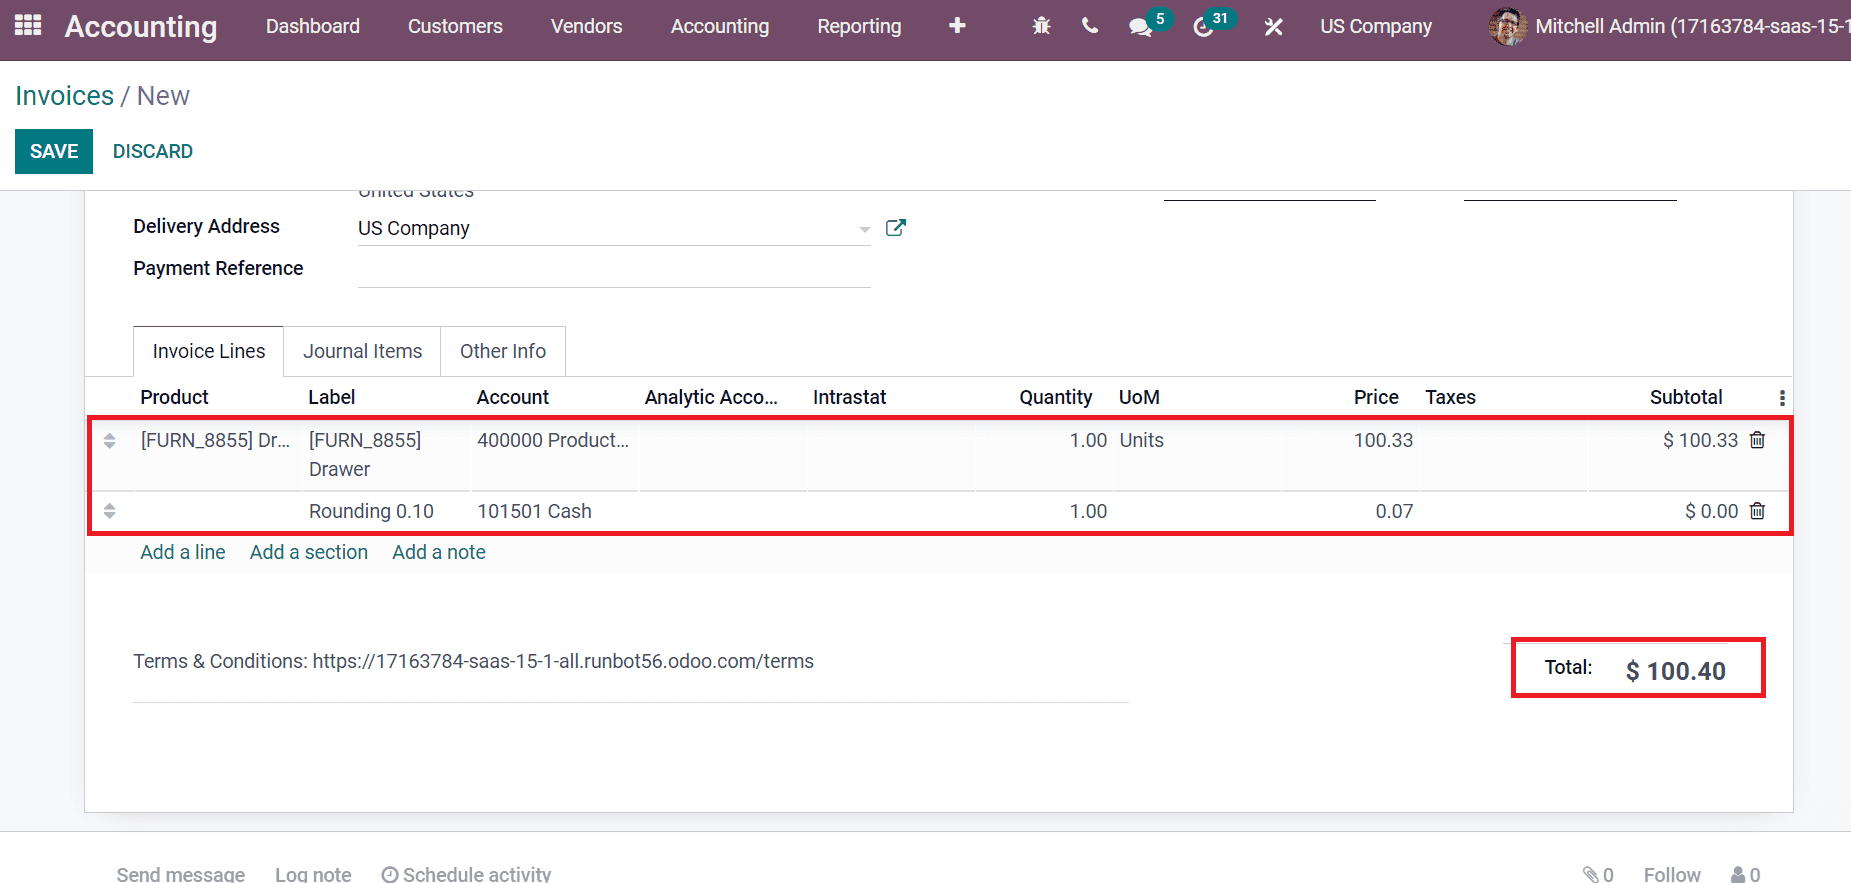 how-to-manage-cash-rounding-in-odoo-15-accounting-cybrosys